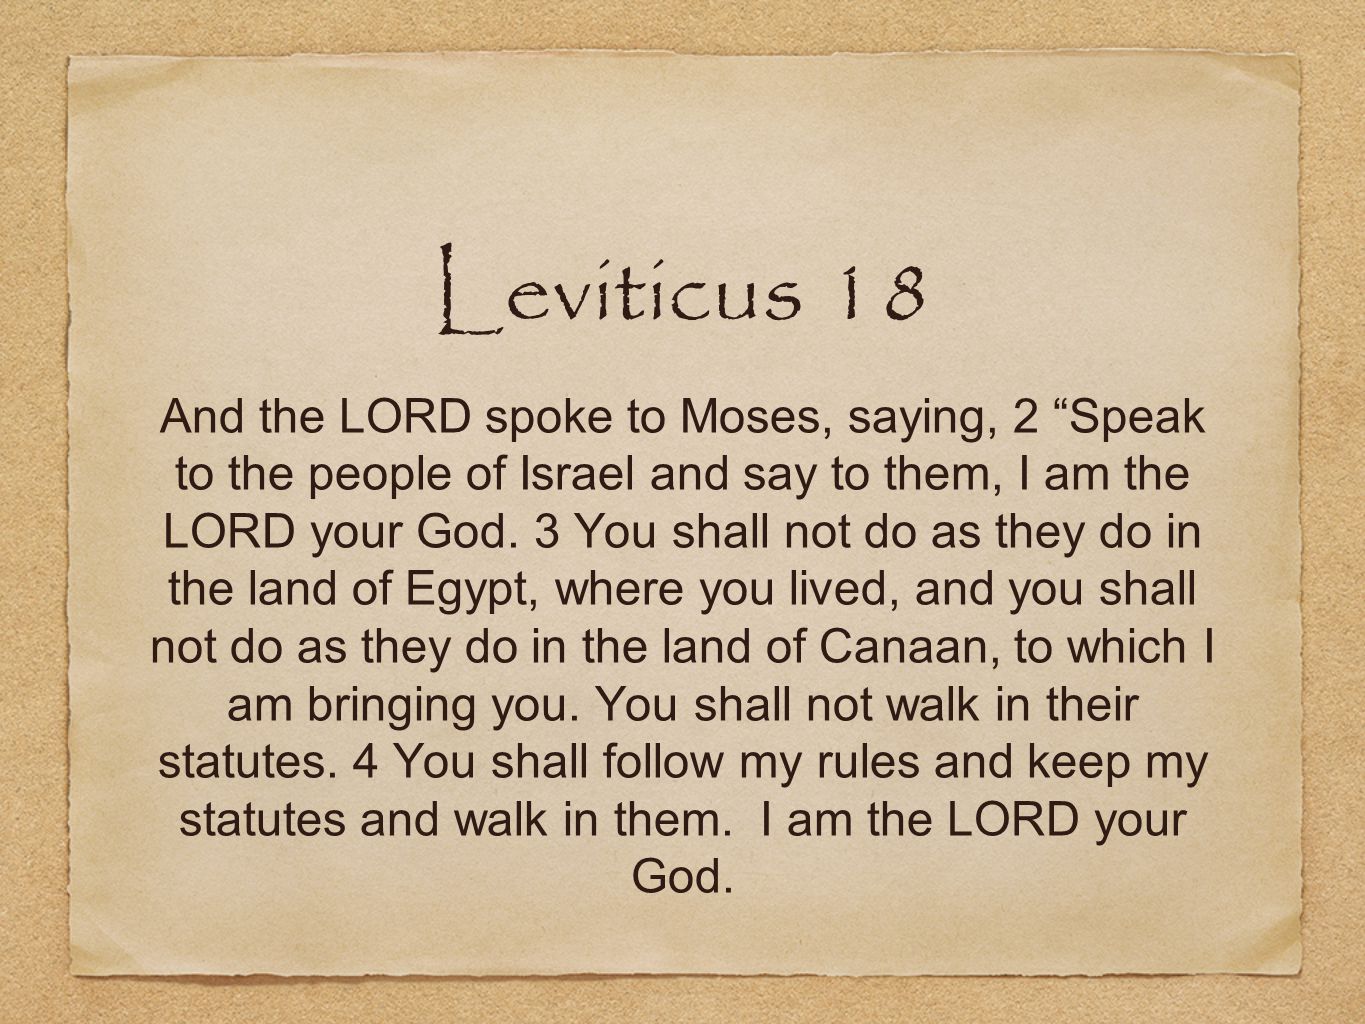 Leviticus 18 And the LORD spoke to Moses, saying, 2 Speak to the people of Israel and say to them, I am the LORD your God.